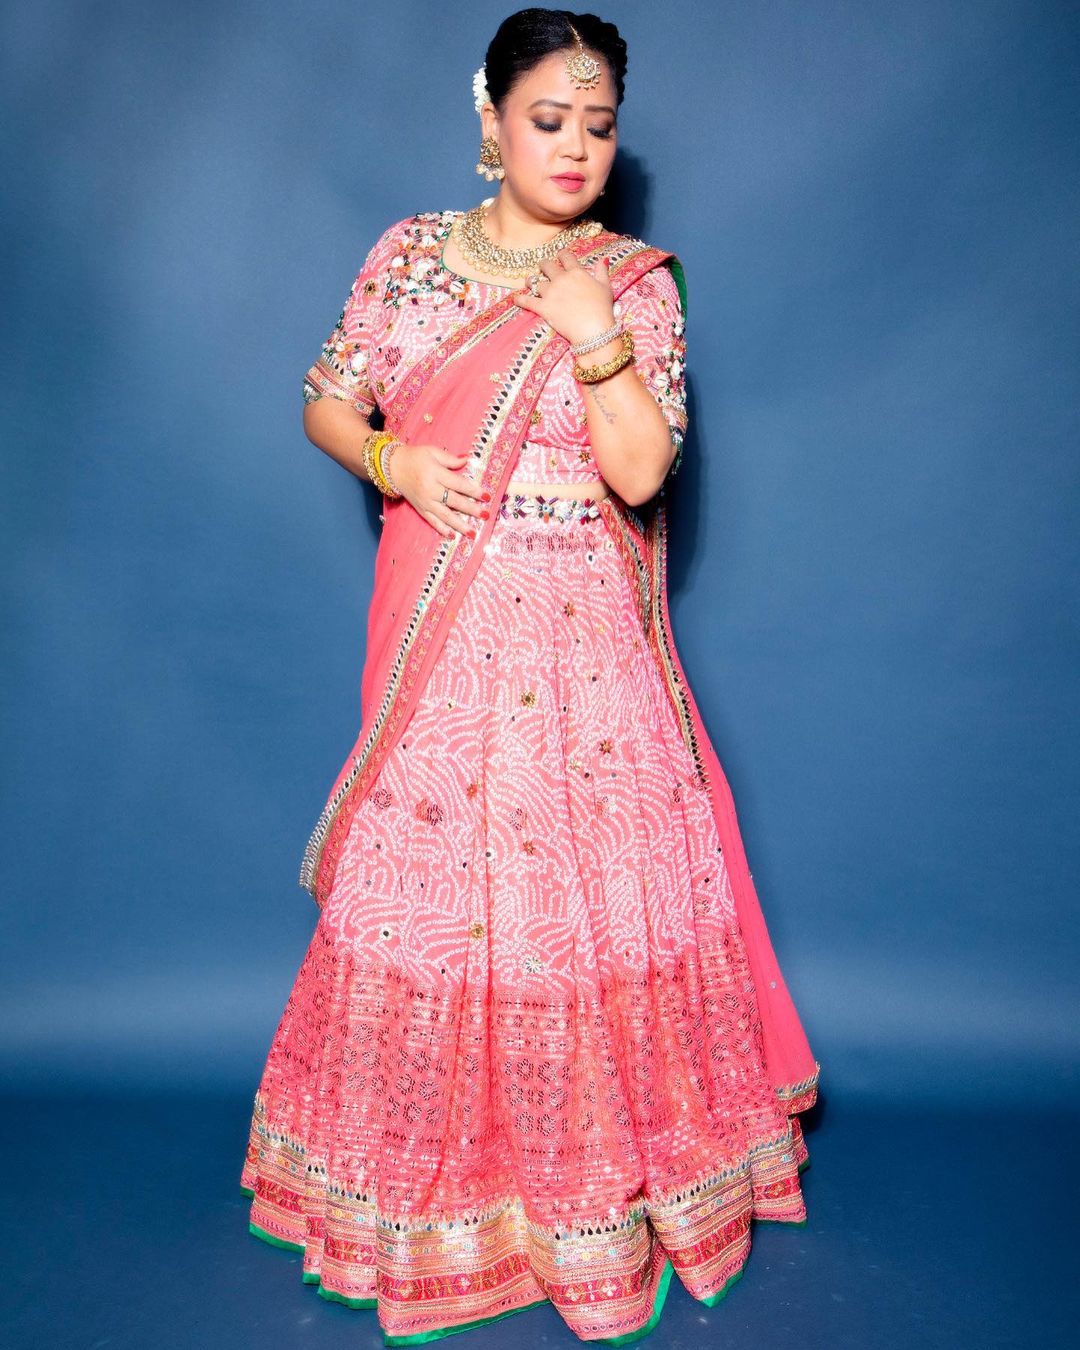 Bharti Singh - The Laughter Queen